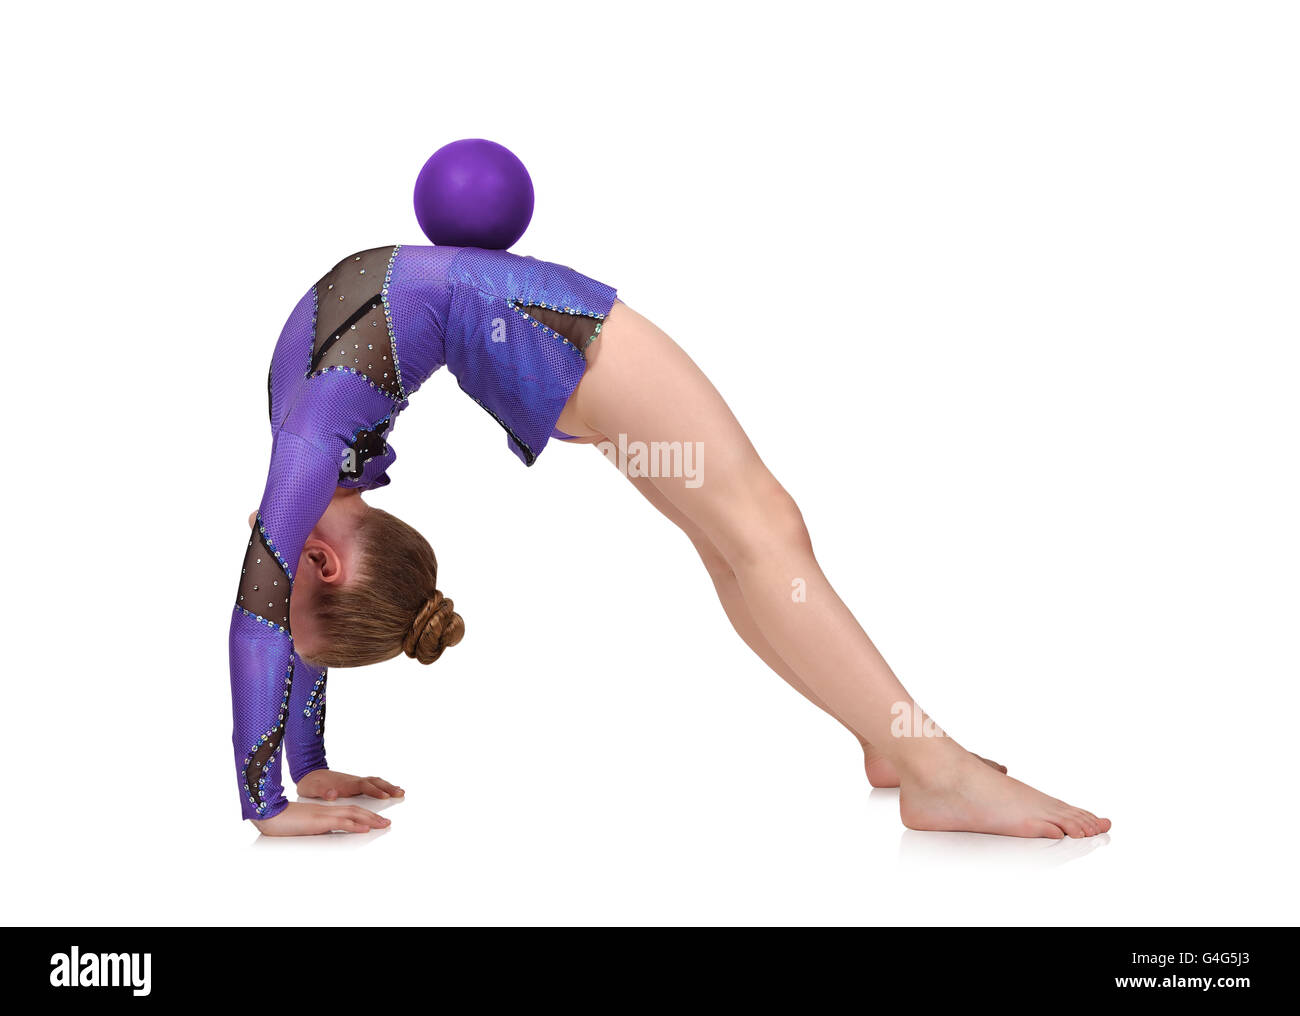 young girl in blue clothes doing gymnastics with ball, isolated on ...